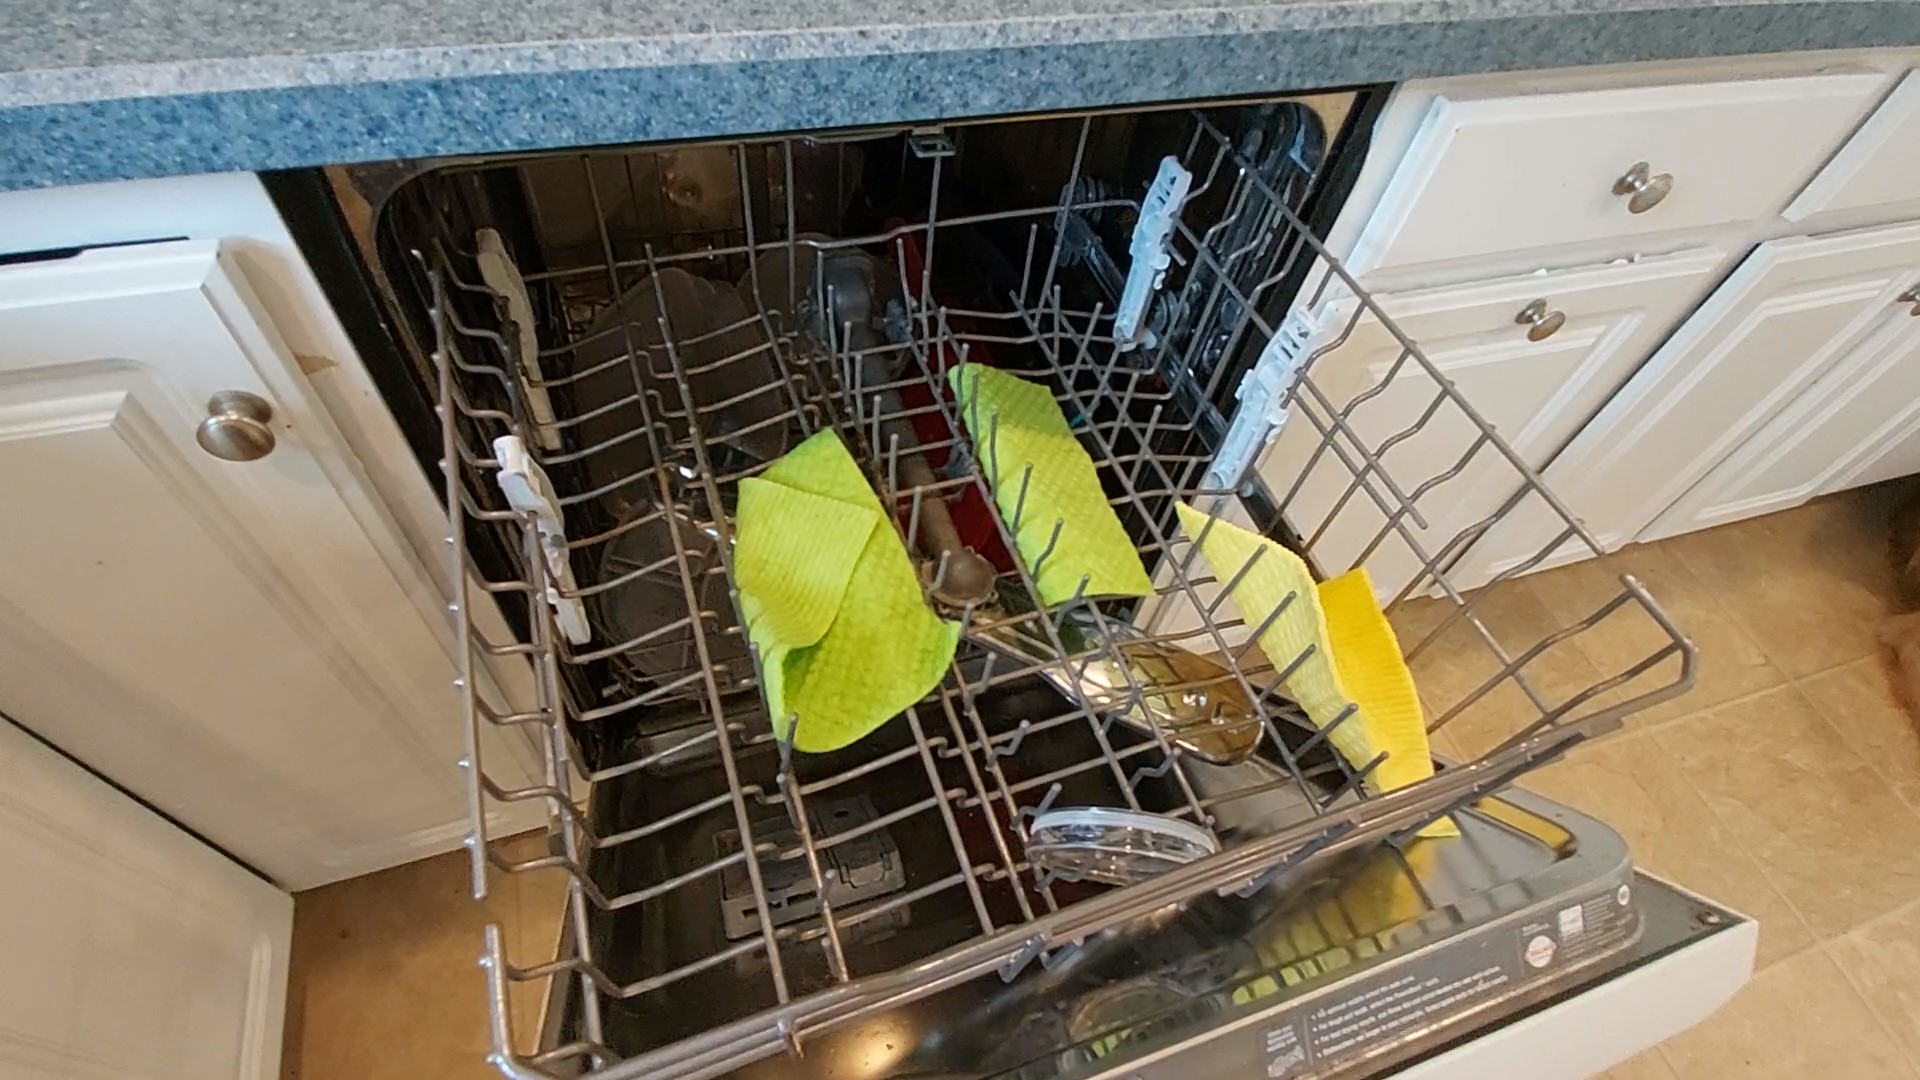 https://www.spongeoutlet.com/wp-content/uploads/2022/04/clean-in-the-upper-rack-of-a-dishwasher-SDC.jpg